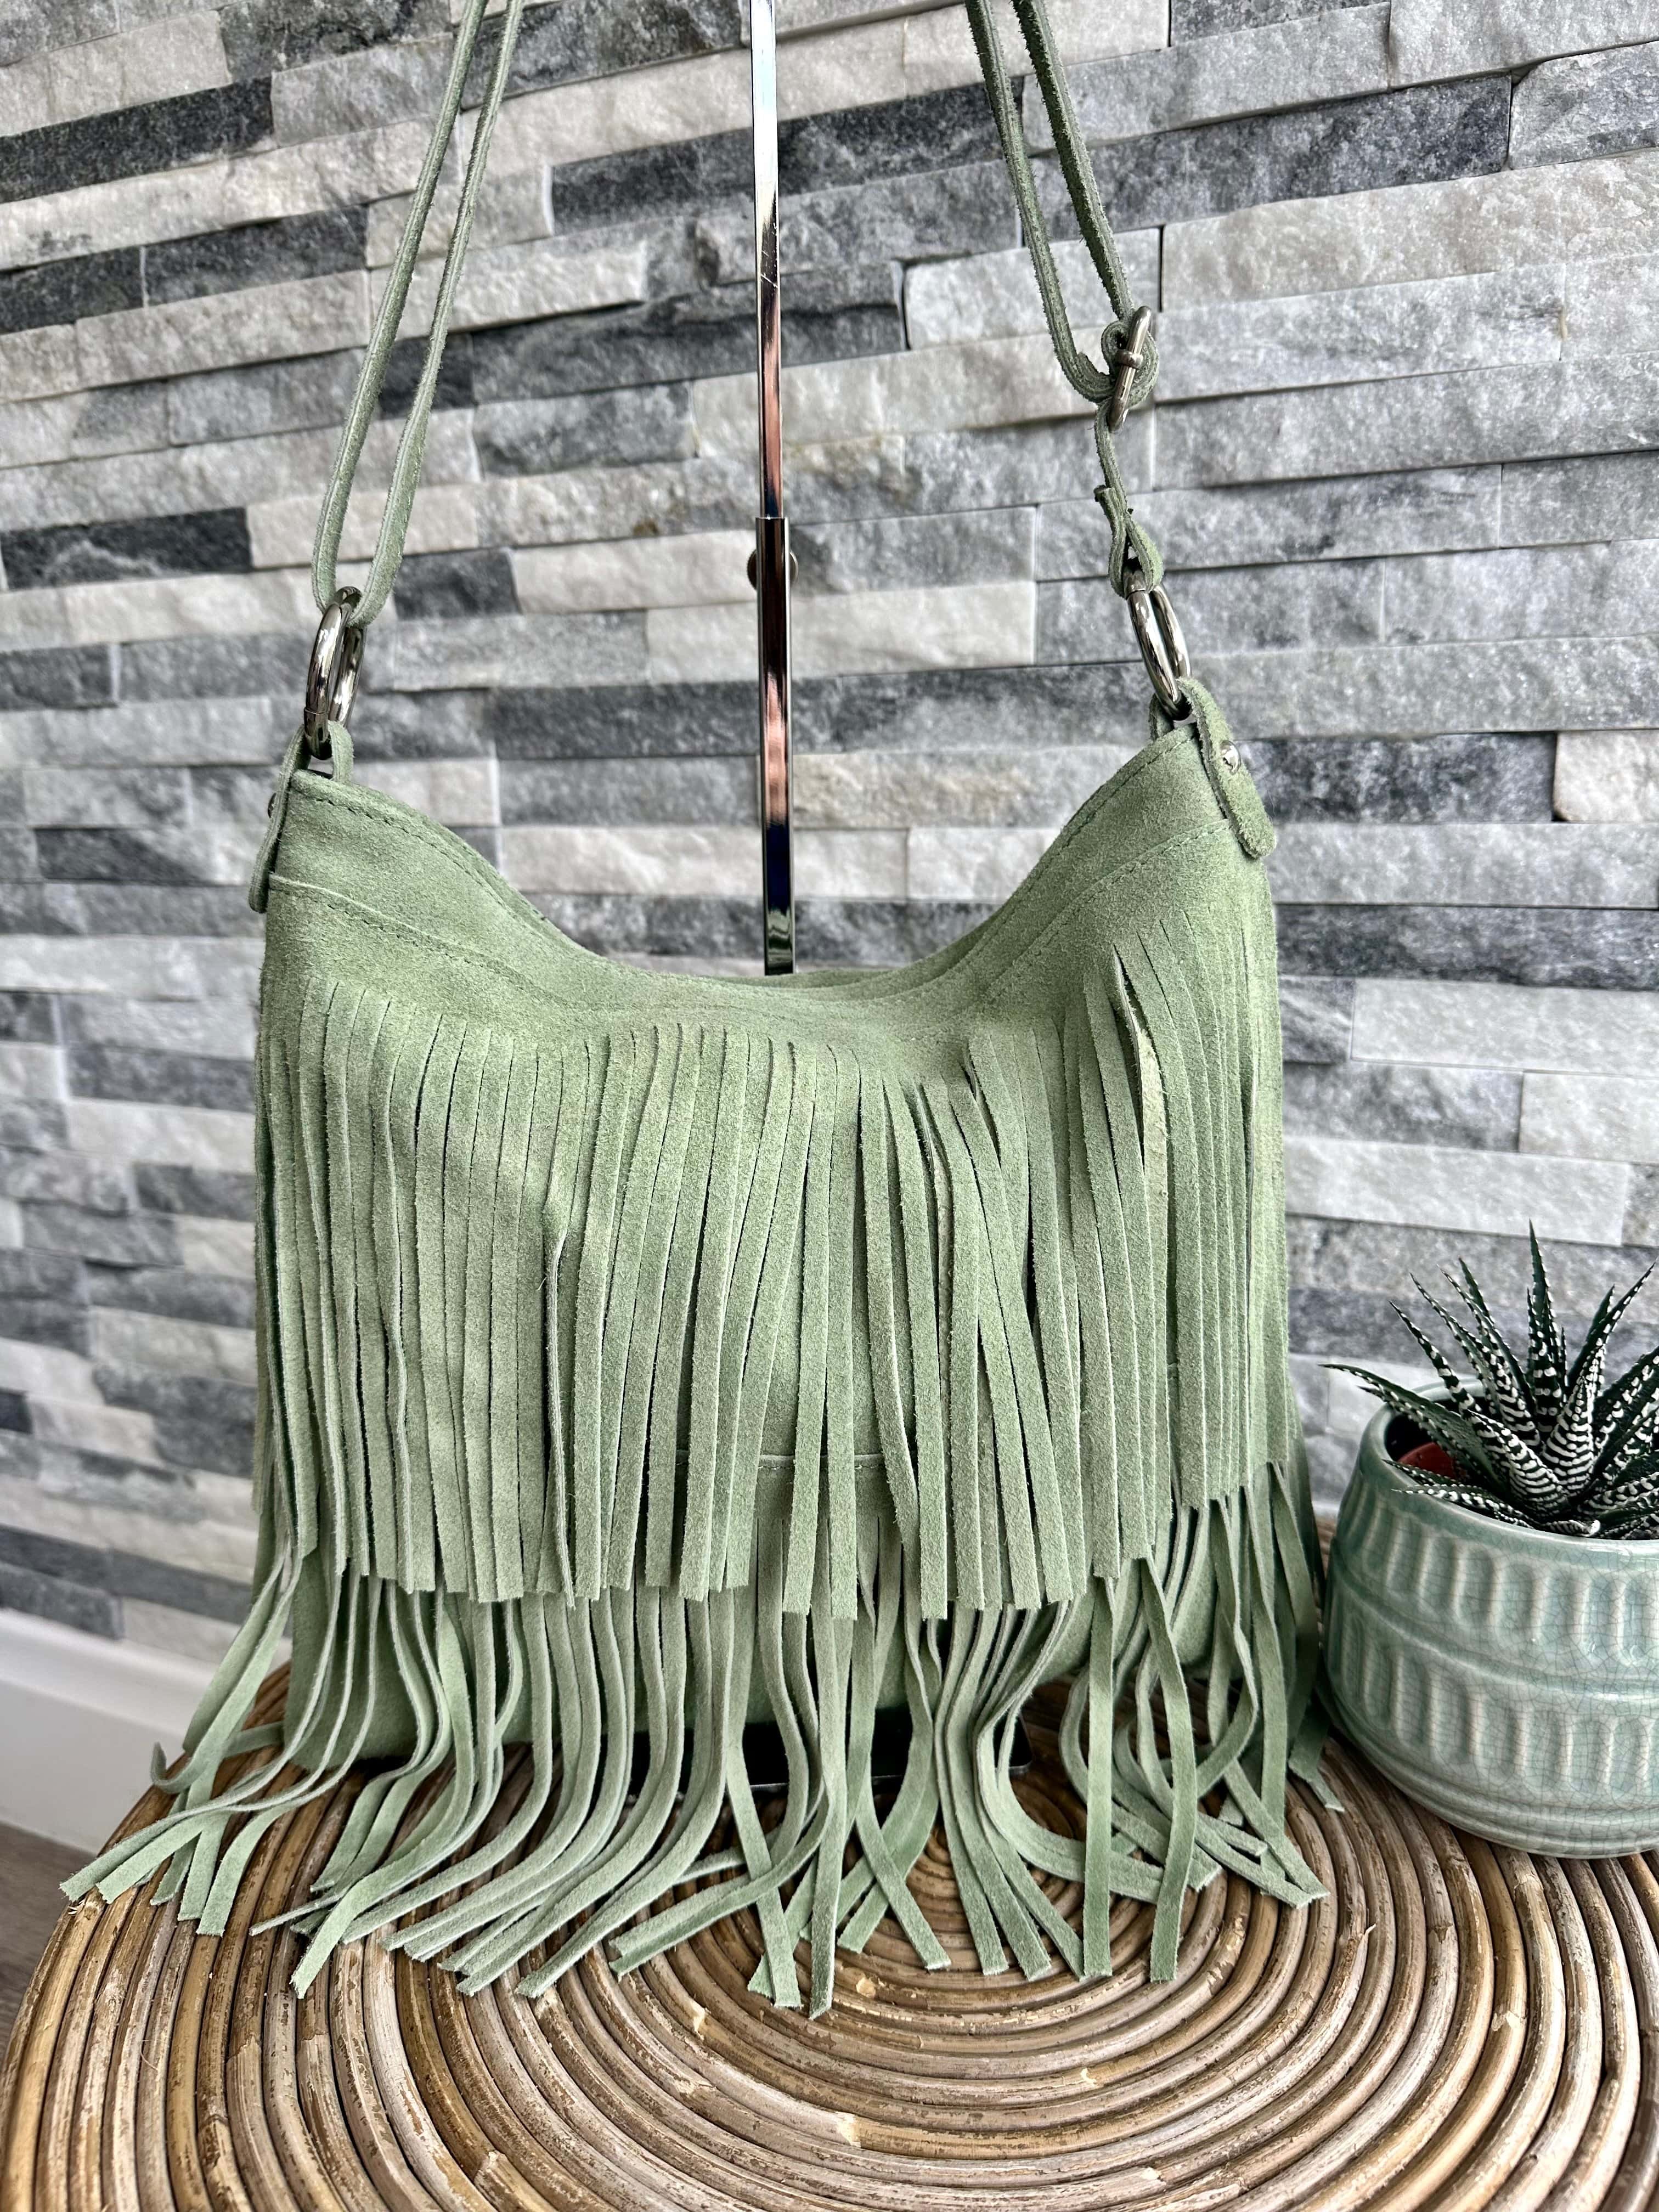 luscious scarves Pale Green Italian Suede Leather Tassel, Fringe Crossbody / Shoulder Bag . 7 Colours Available